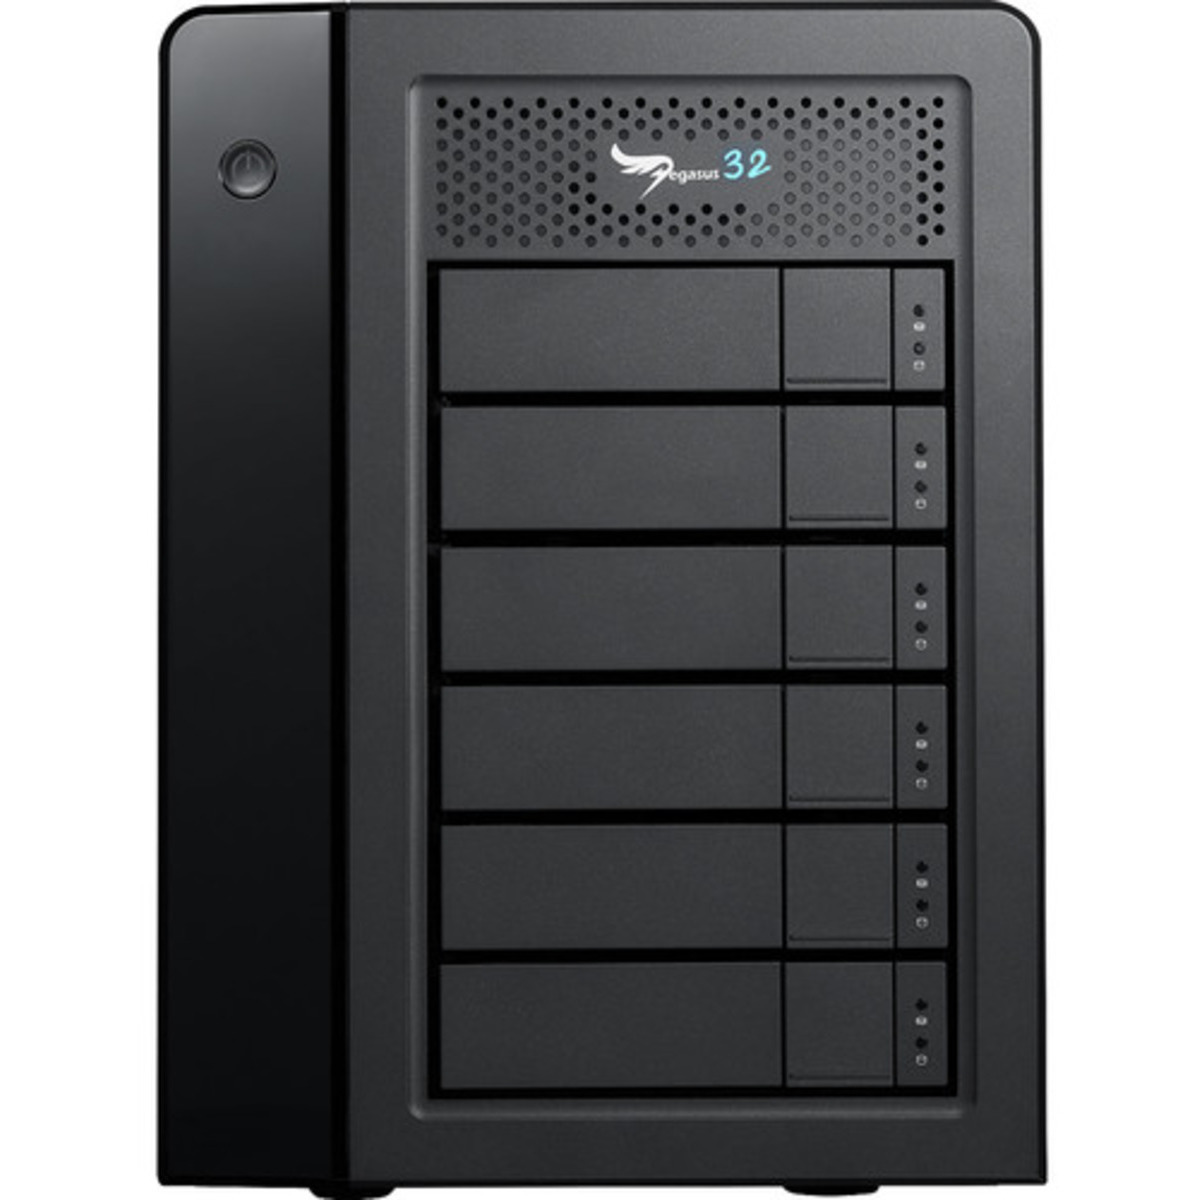 Promise Technology Pegasus32 R6 Thunderbolt 3 20tb 6-Bay Desktop Multimedia / Power User / Business DAS - Direct Attached Storage Device 5x4tb Sandisk Ultra 3D SDSSDH3-4T00 2.5 560/520MB/s SATA 6Gb/s SSD CONSUMER Class Drives Installed - Burn-In Tested Pegasus32 R6 Thunderbolt 3